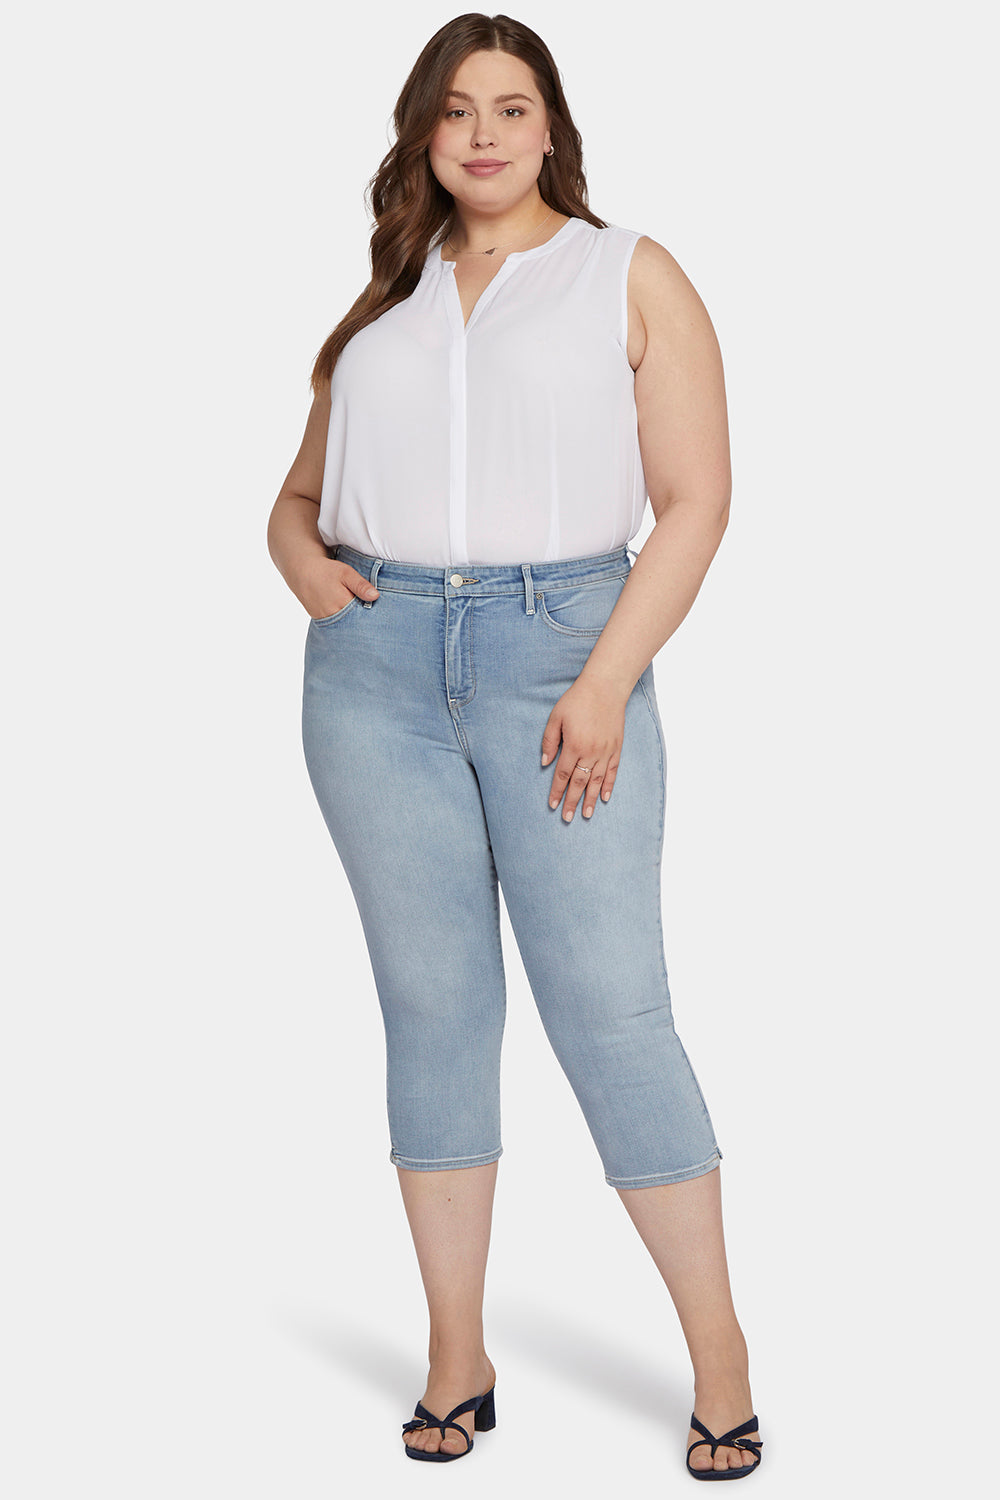 NYDJ Slim Straight Crop Jeans In Curves 360 Denim With Side Slits - Charmed